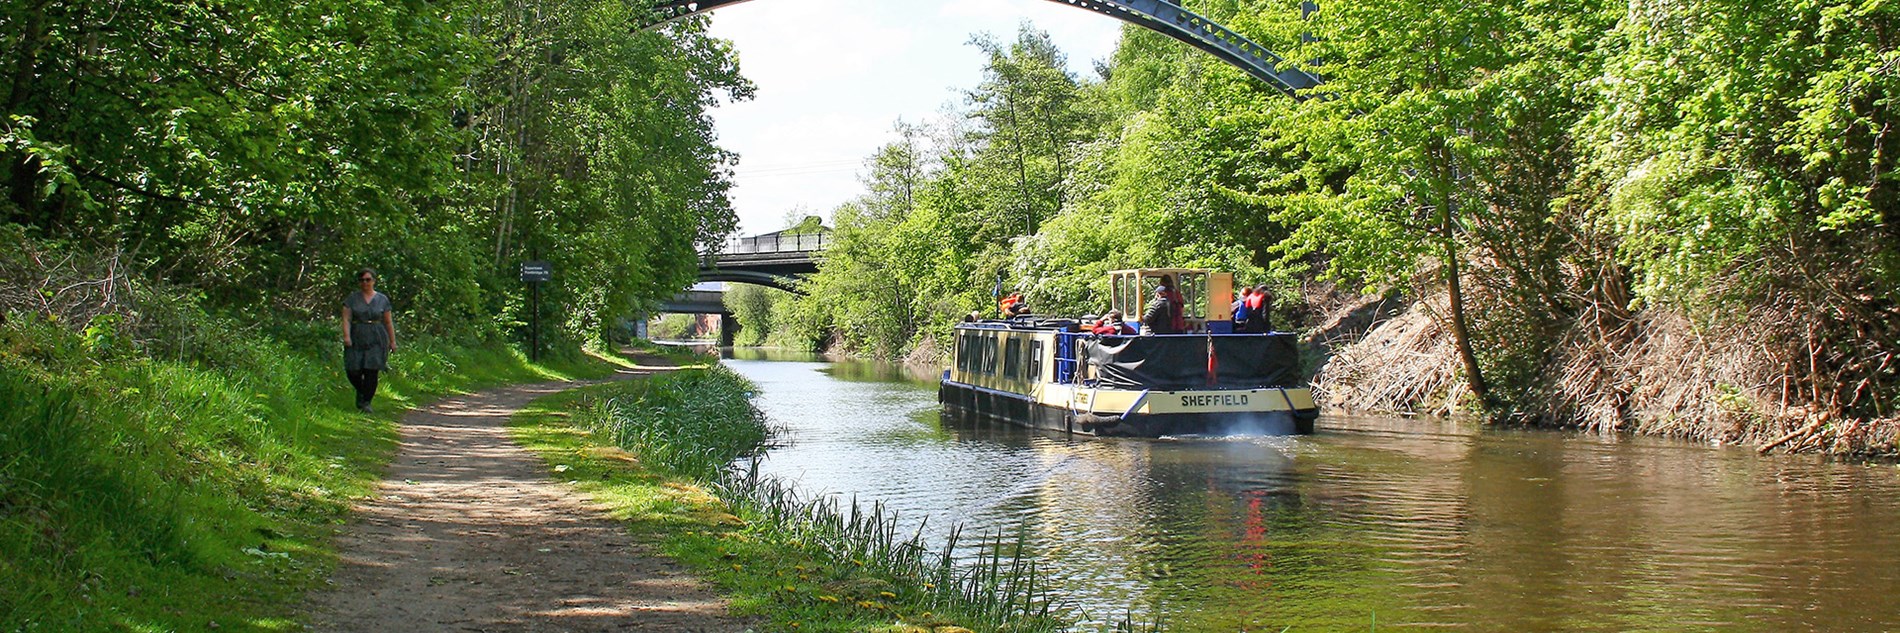 A canal boat on the water going under the first of three bridges on a sunny day. On the left bank a person walks along the footpath which runs next to green trees. On the opposite bank trees and scrub vegetation grow next to the water.